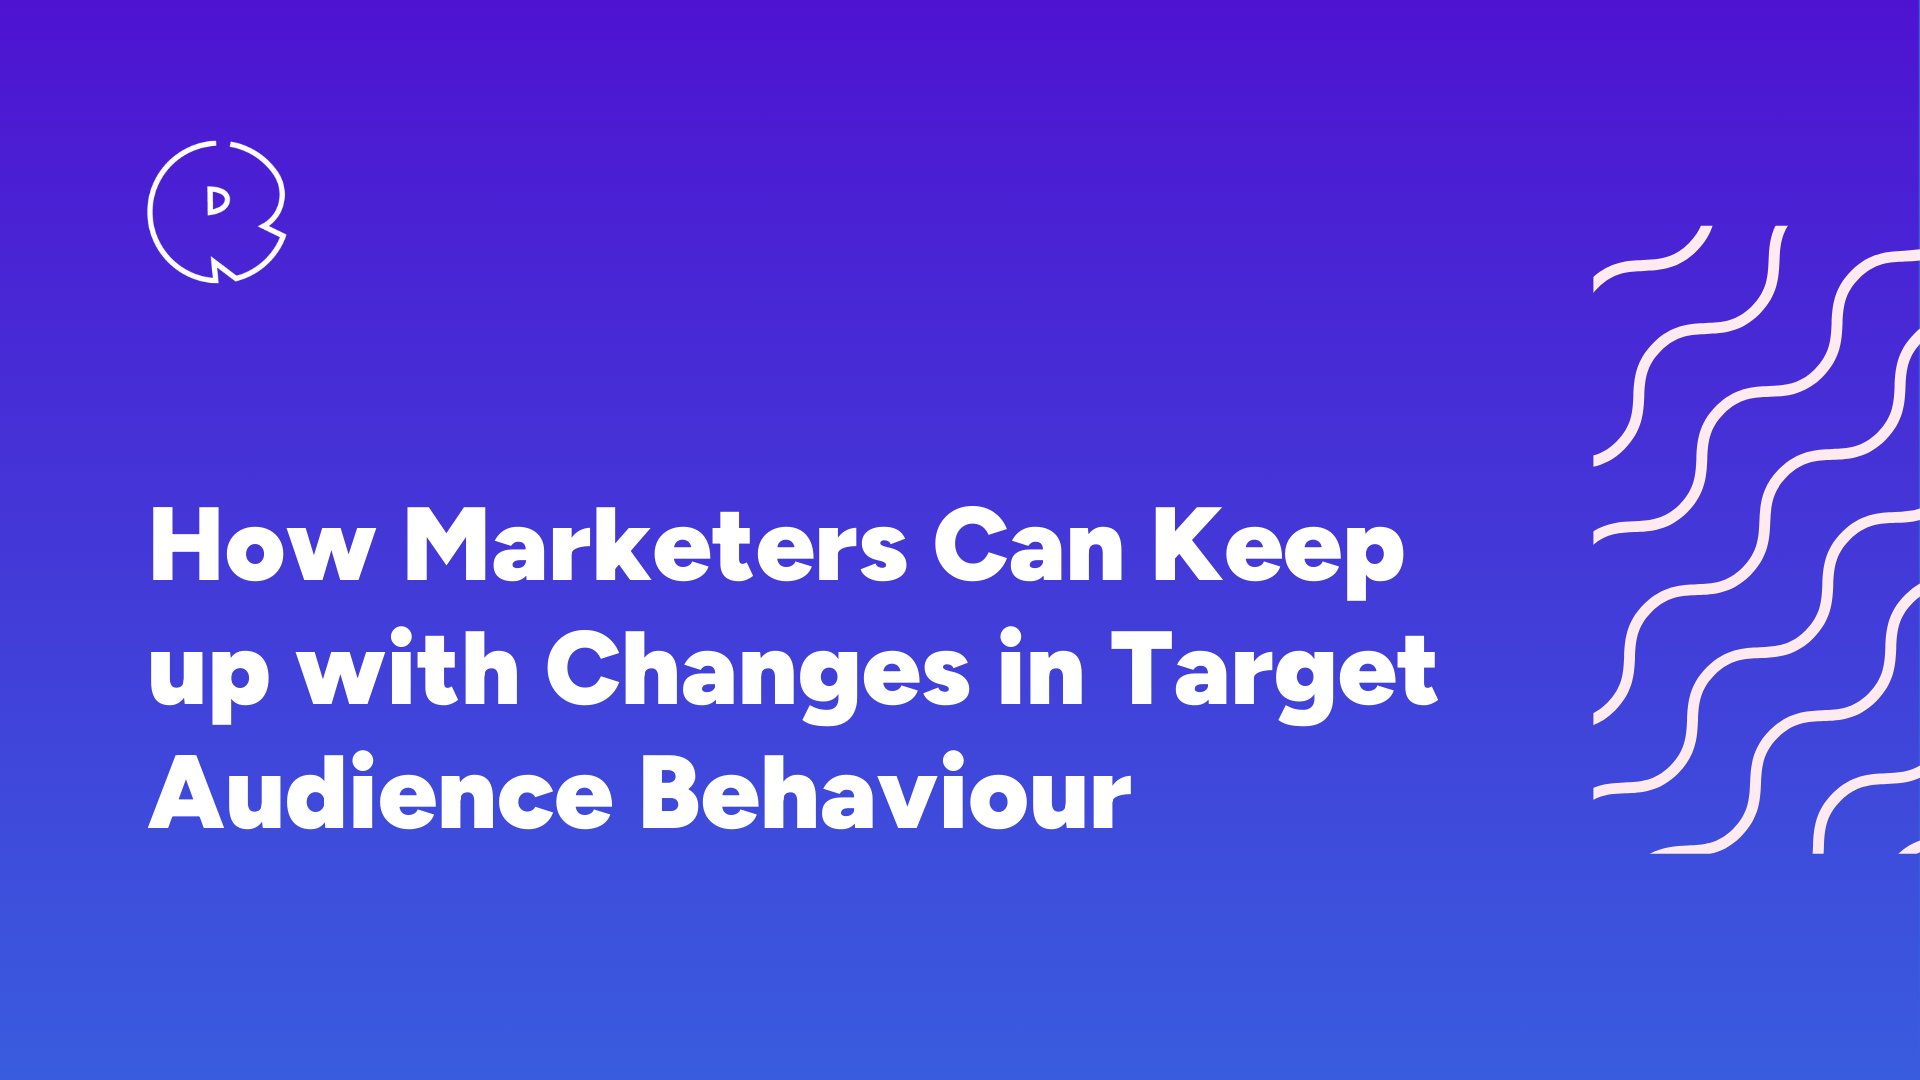 How Marketers Can Keep up with Changes in Target Audience Behaviour